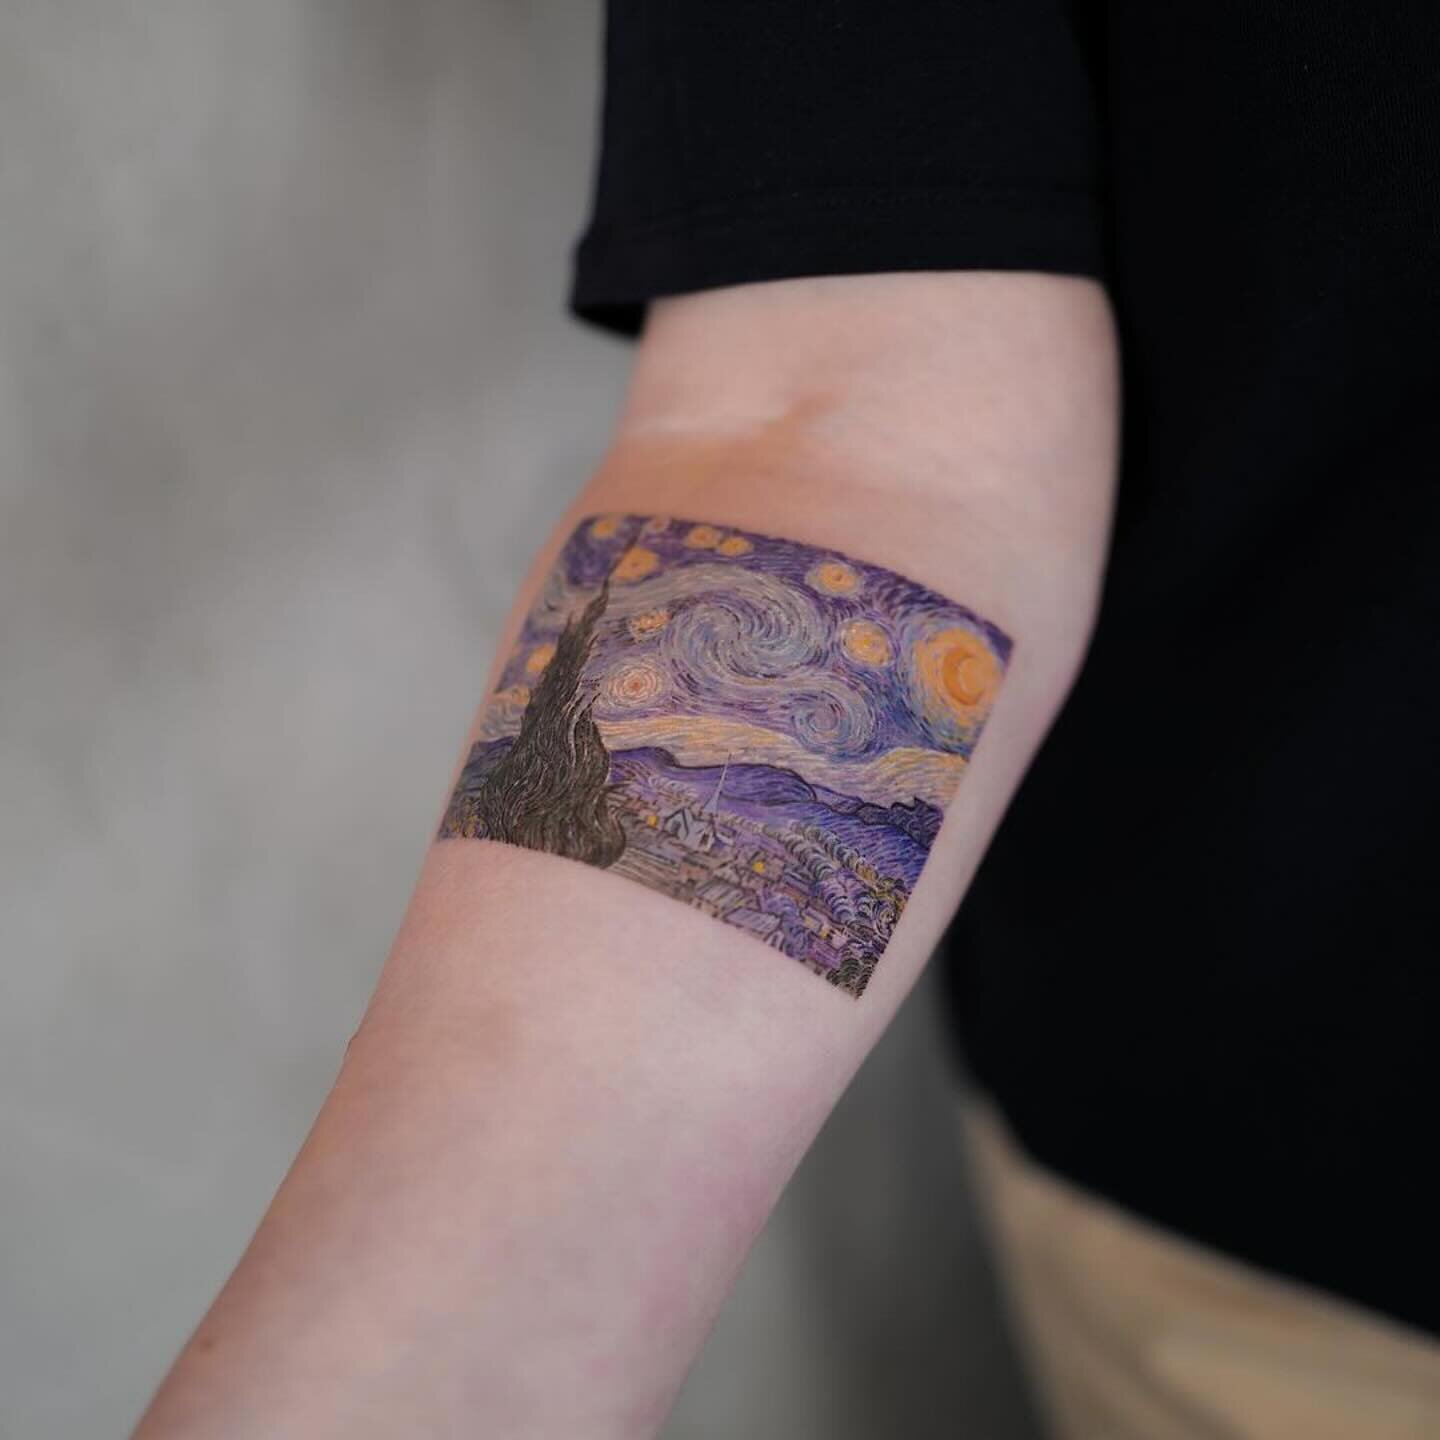 Vincent van Gogh&rsquo;s &ldquo;The Starry Night&rdquo;. 

Done by our founder @evakrdbdk. 

#AtelierEva #FineArtTattoo